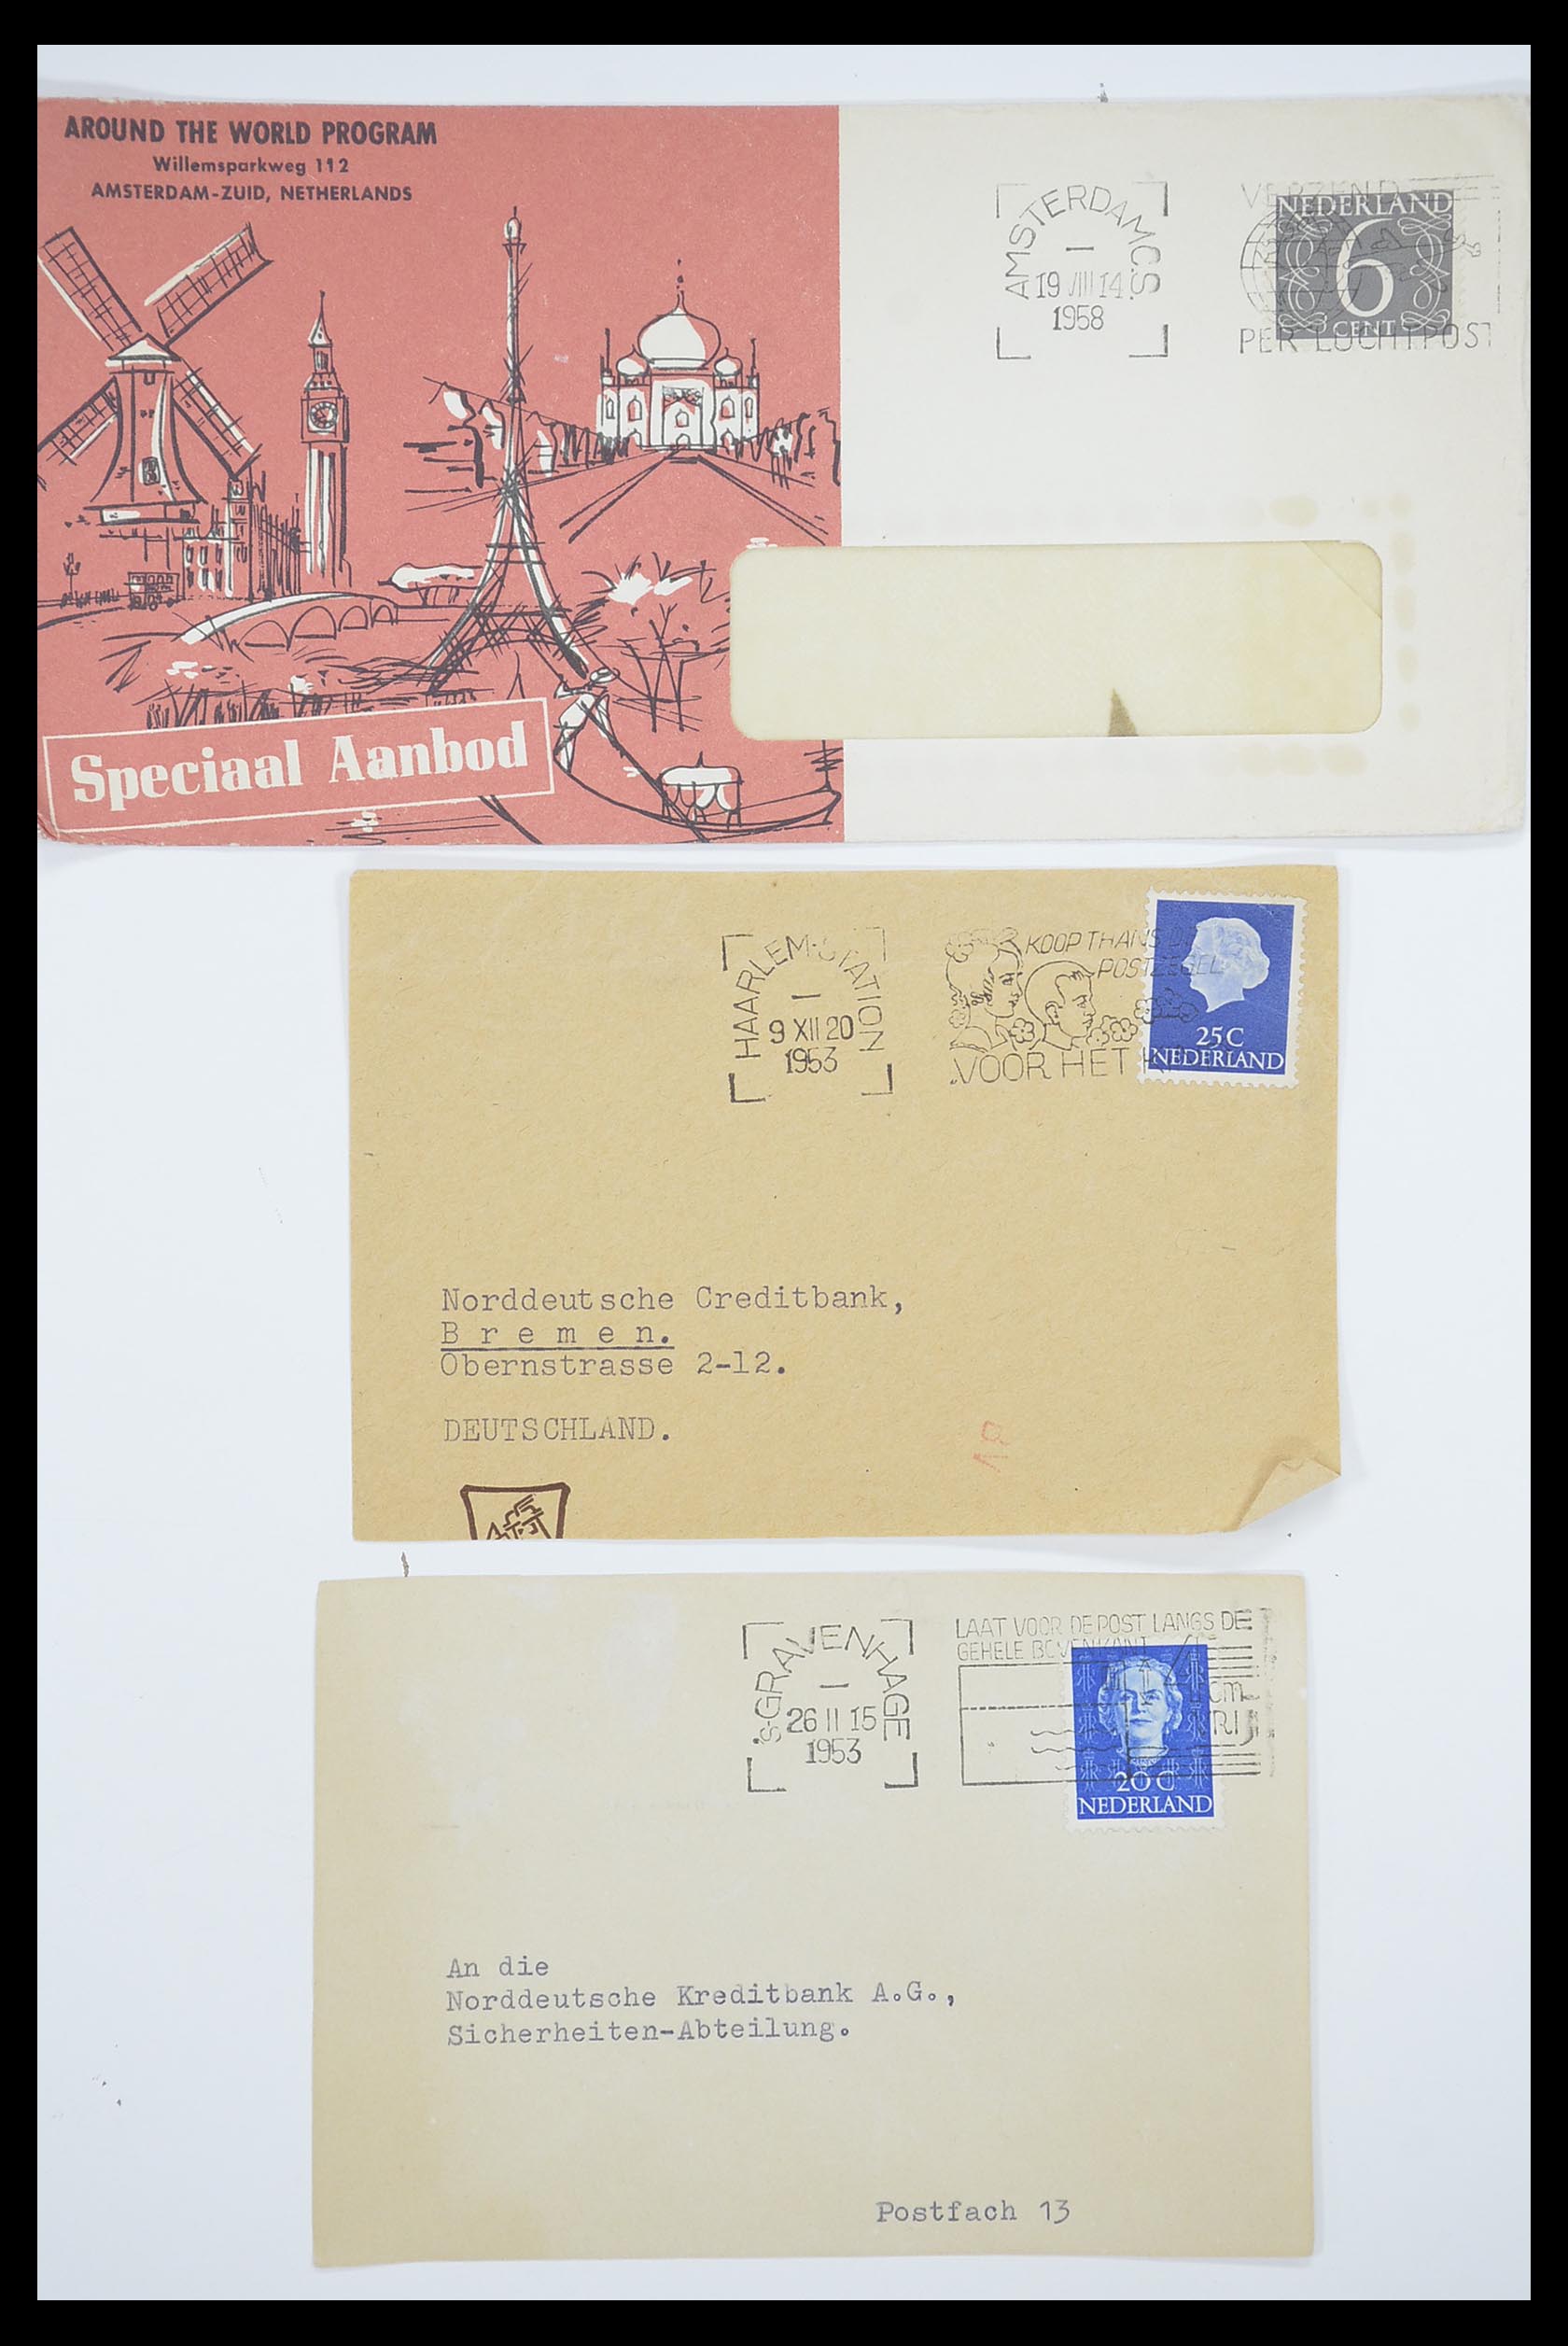 33536 091 - Stamp collection 33536 Netherlands covers 1800-1950.